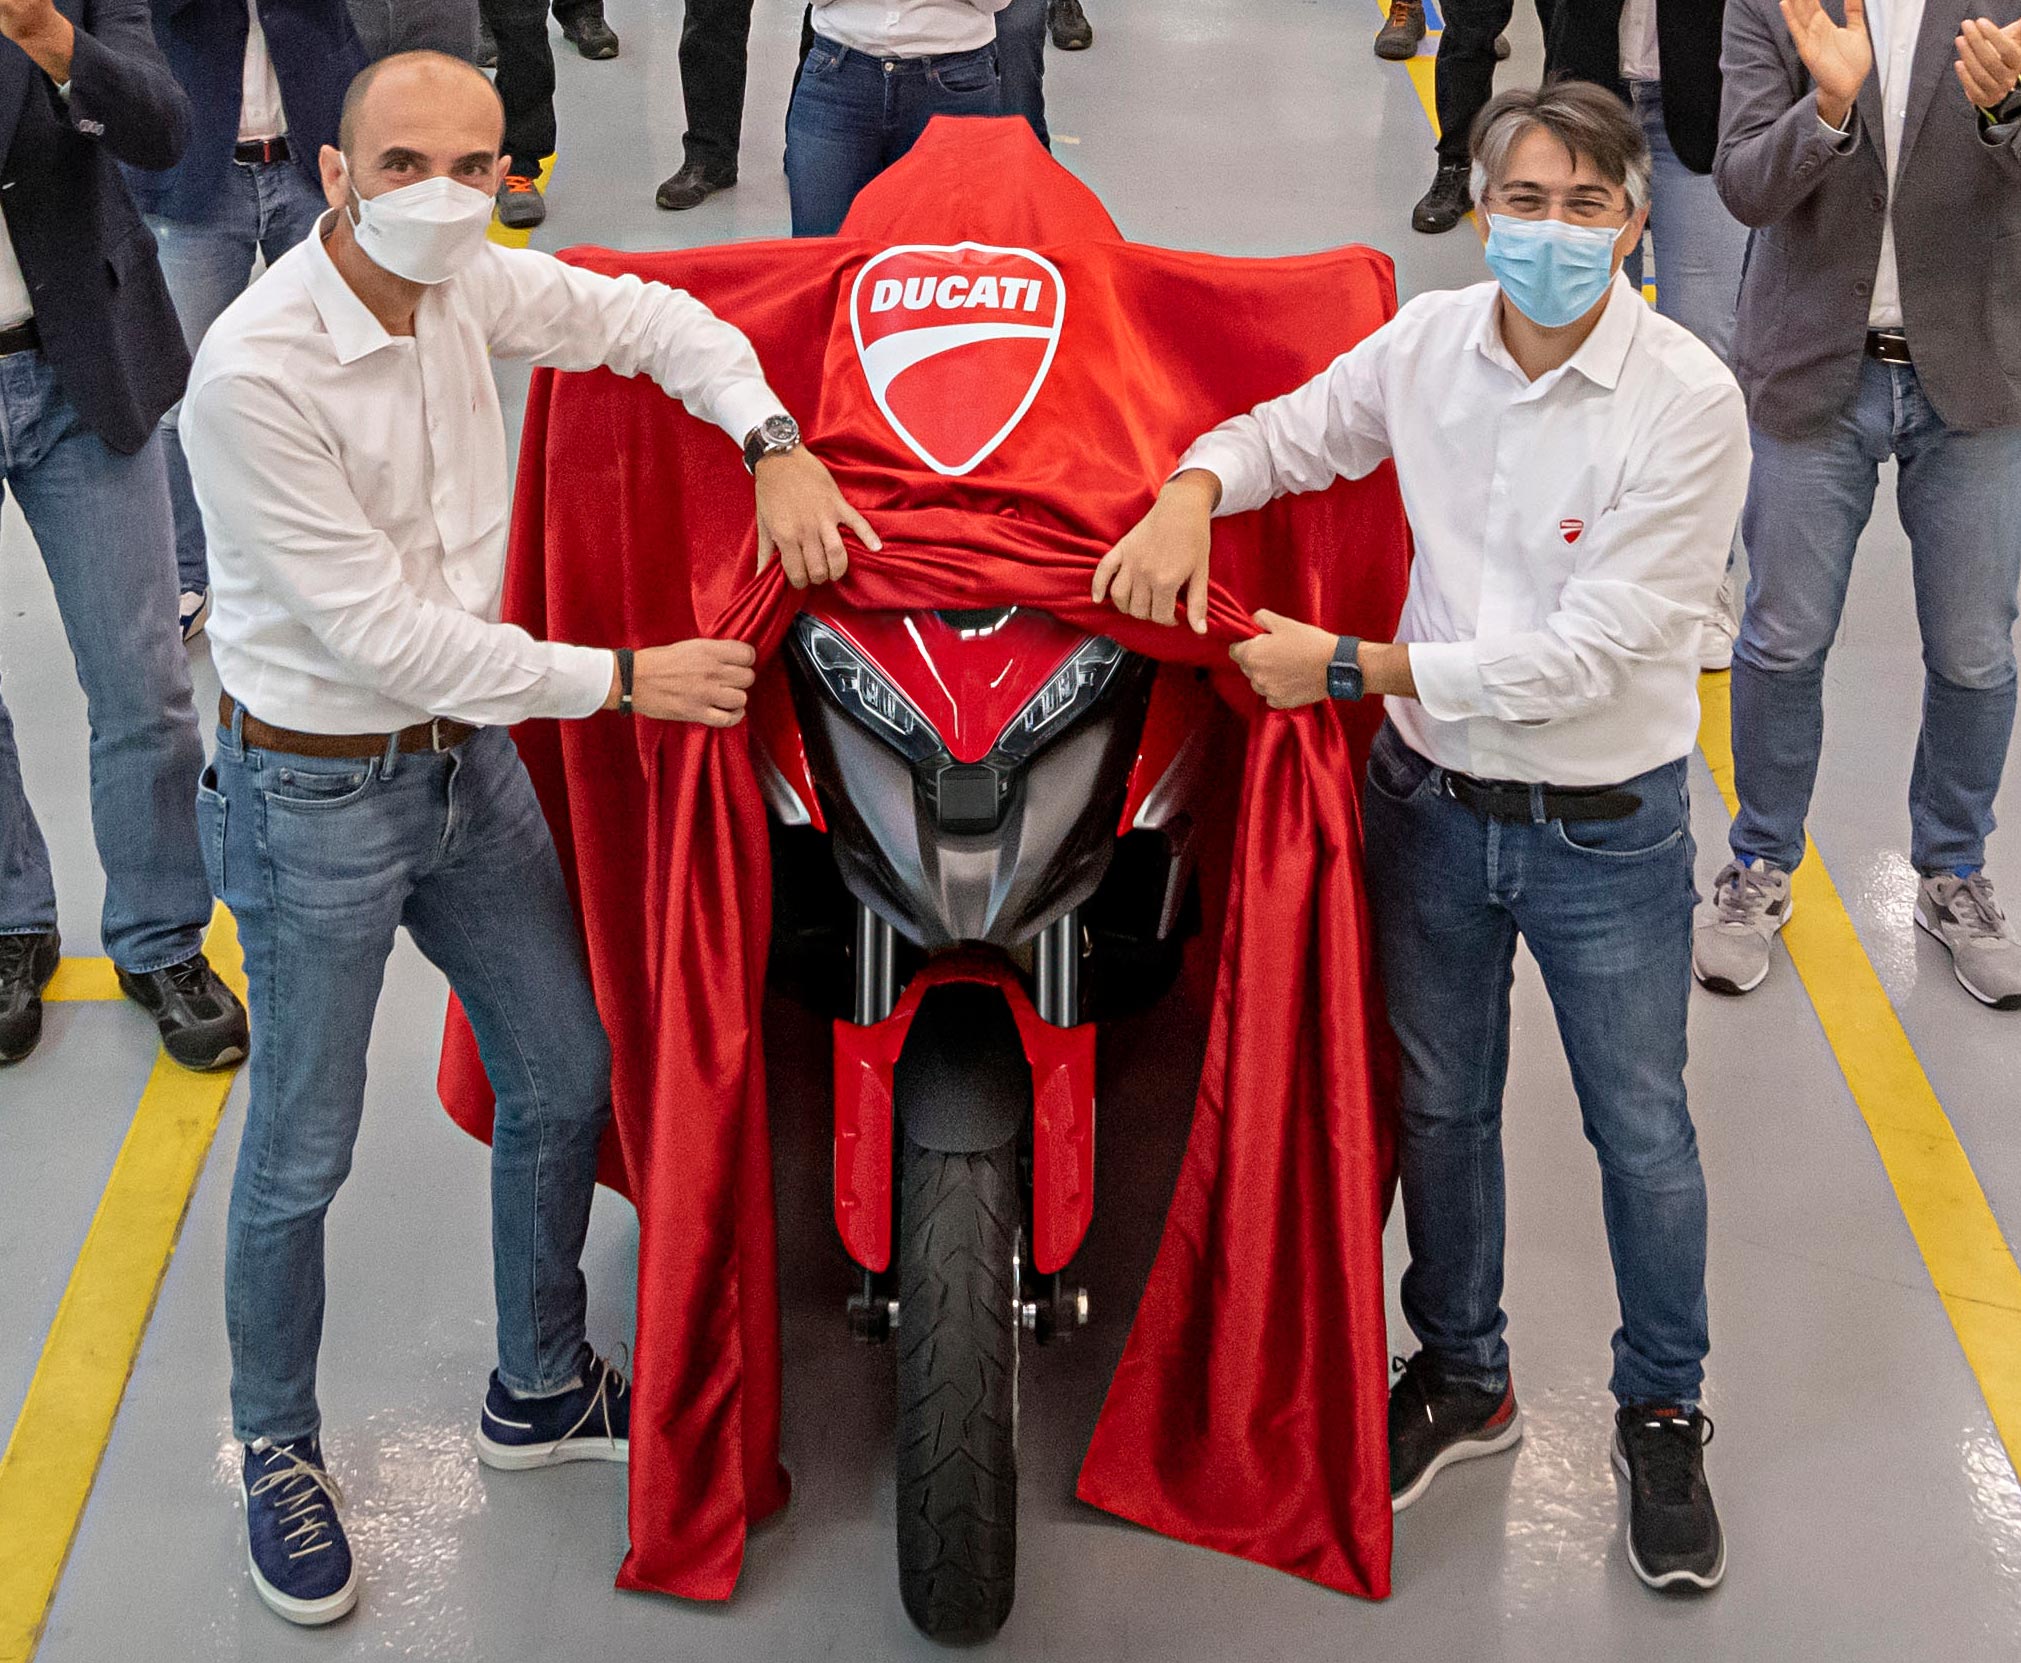 [Street] Ducati starts 2021 with record numbers